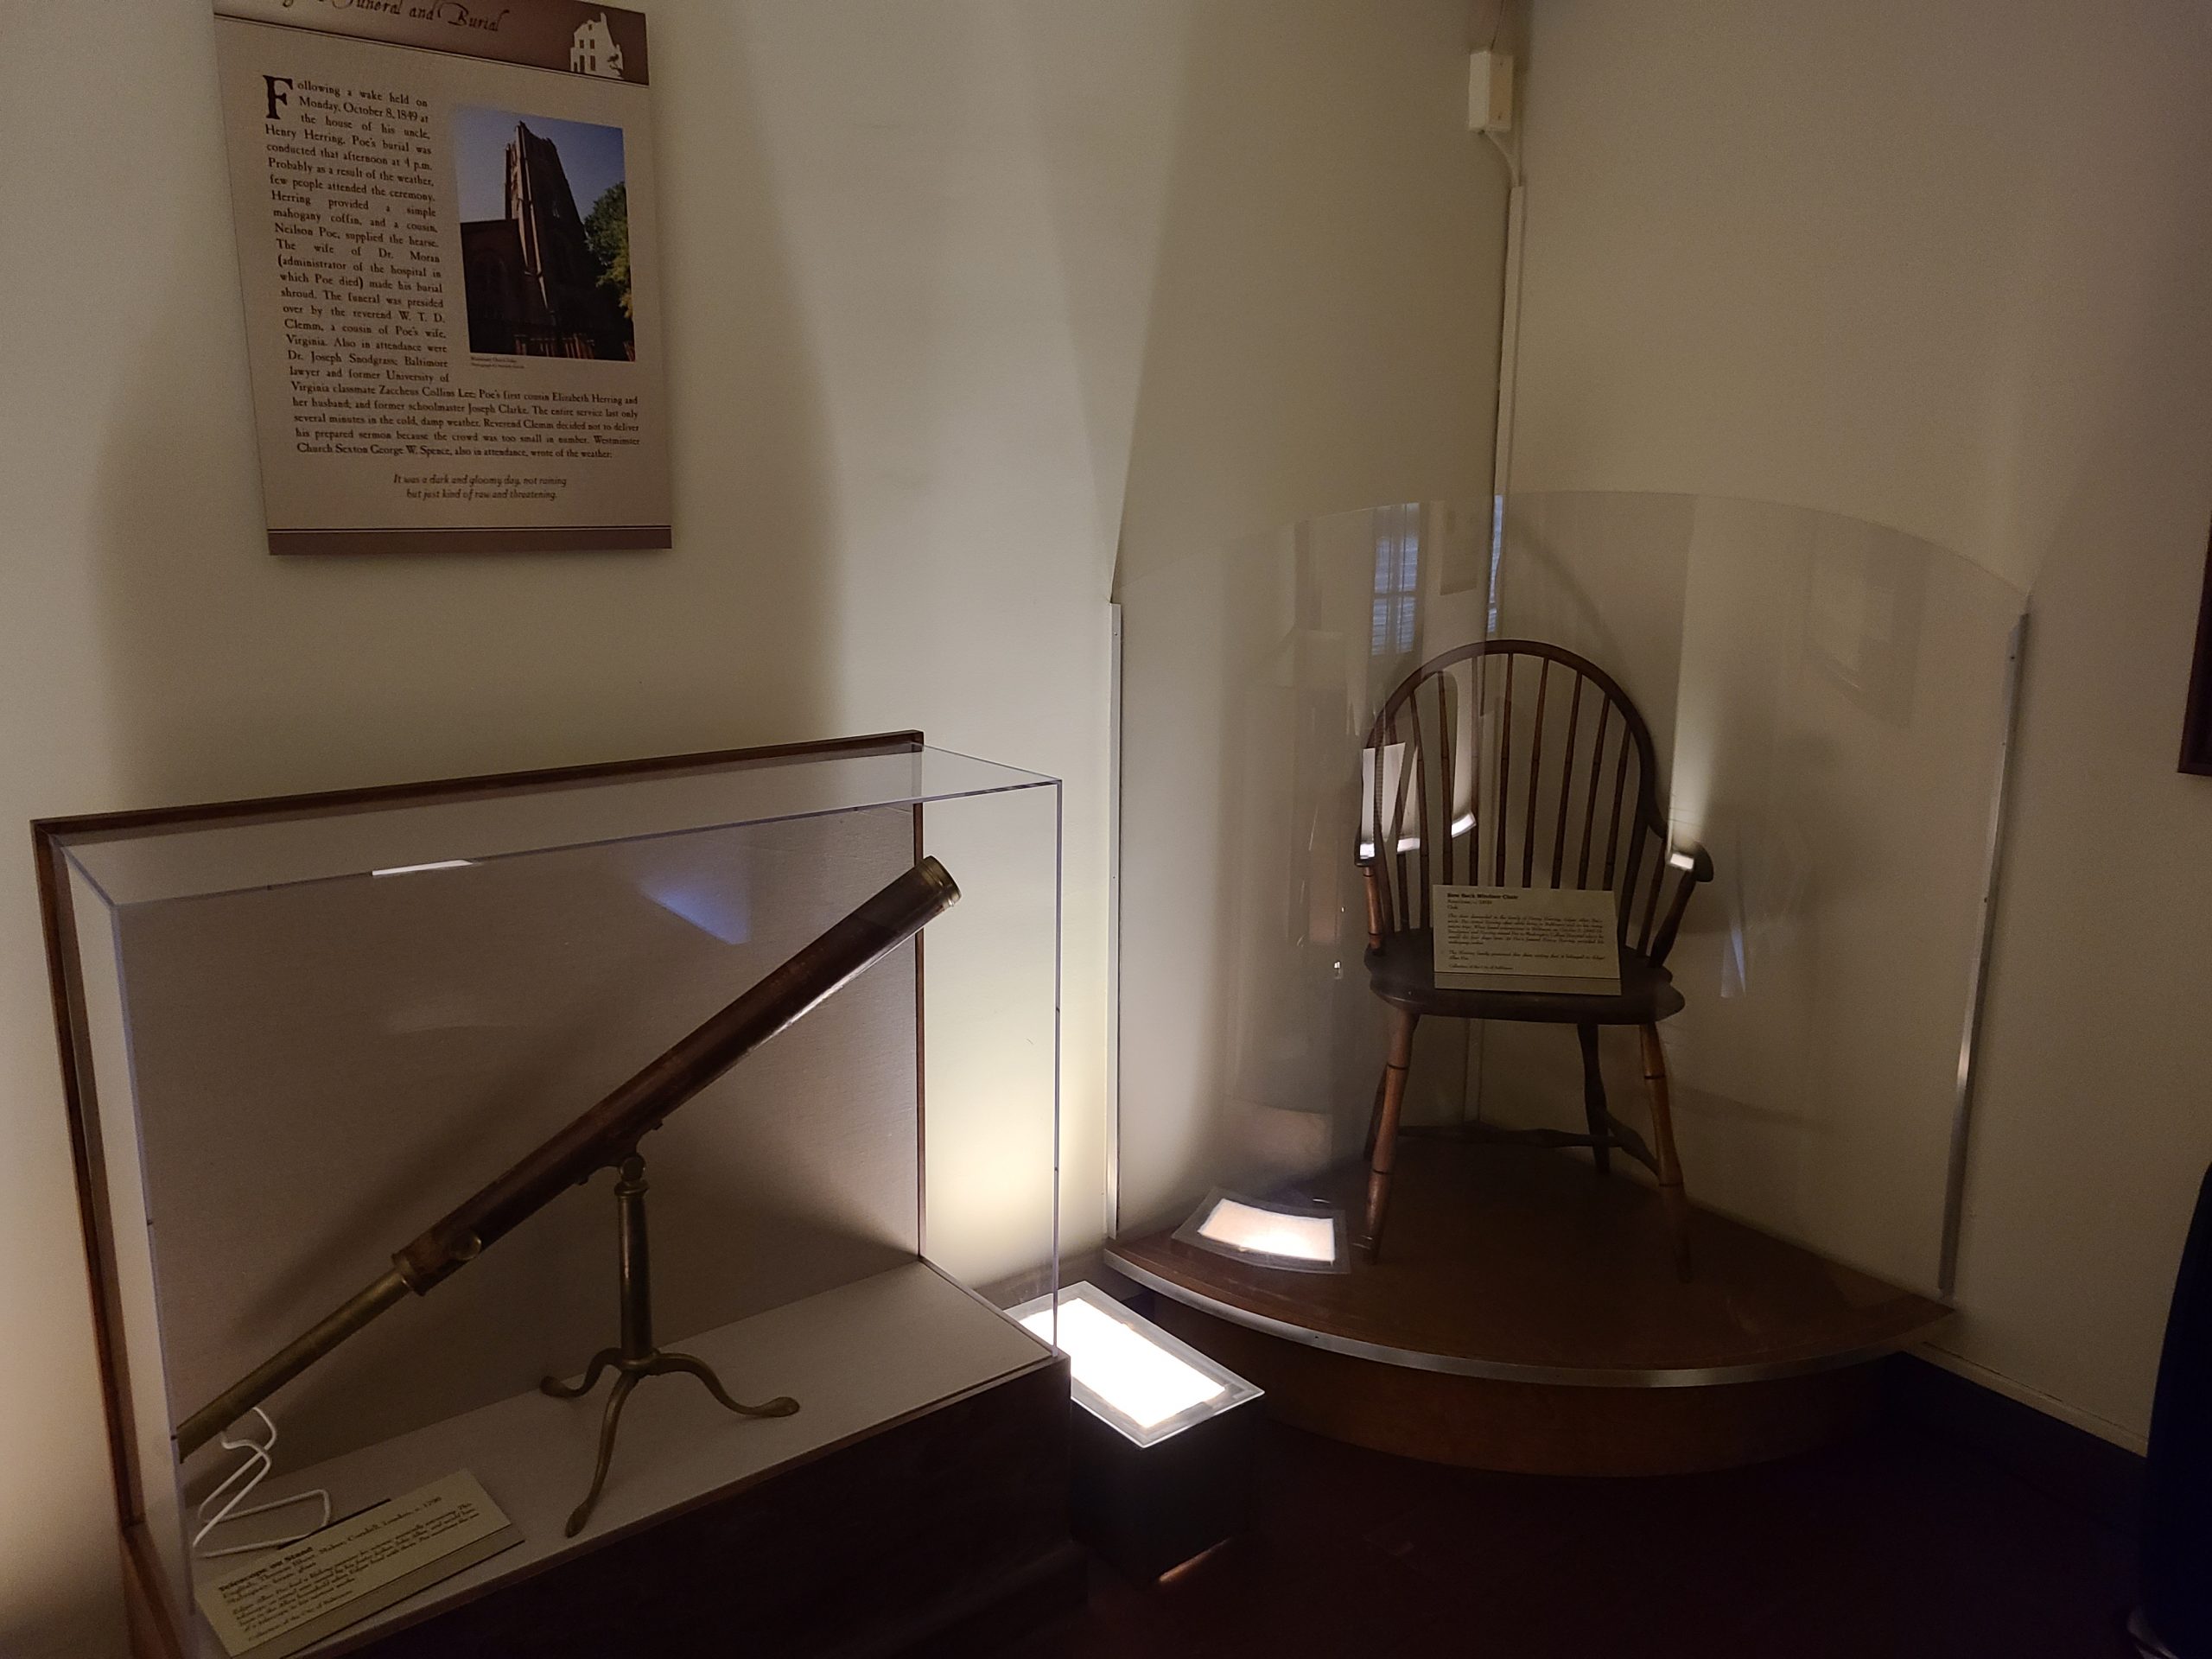 A rocking chair and telescope protected in glass cases in the Edgar Allan Poe museum